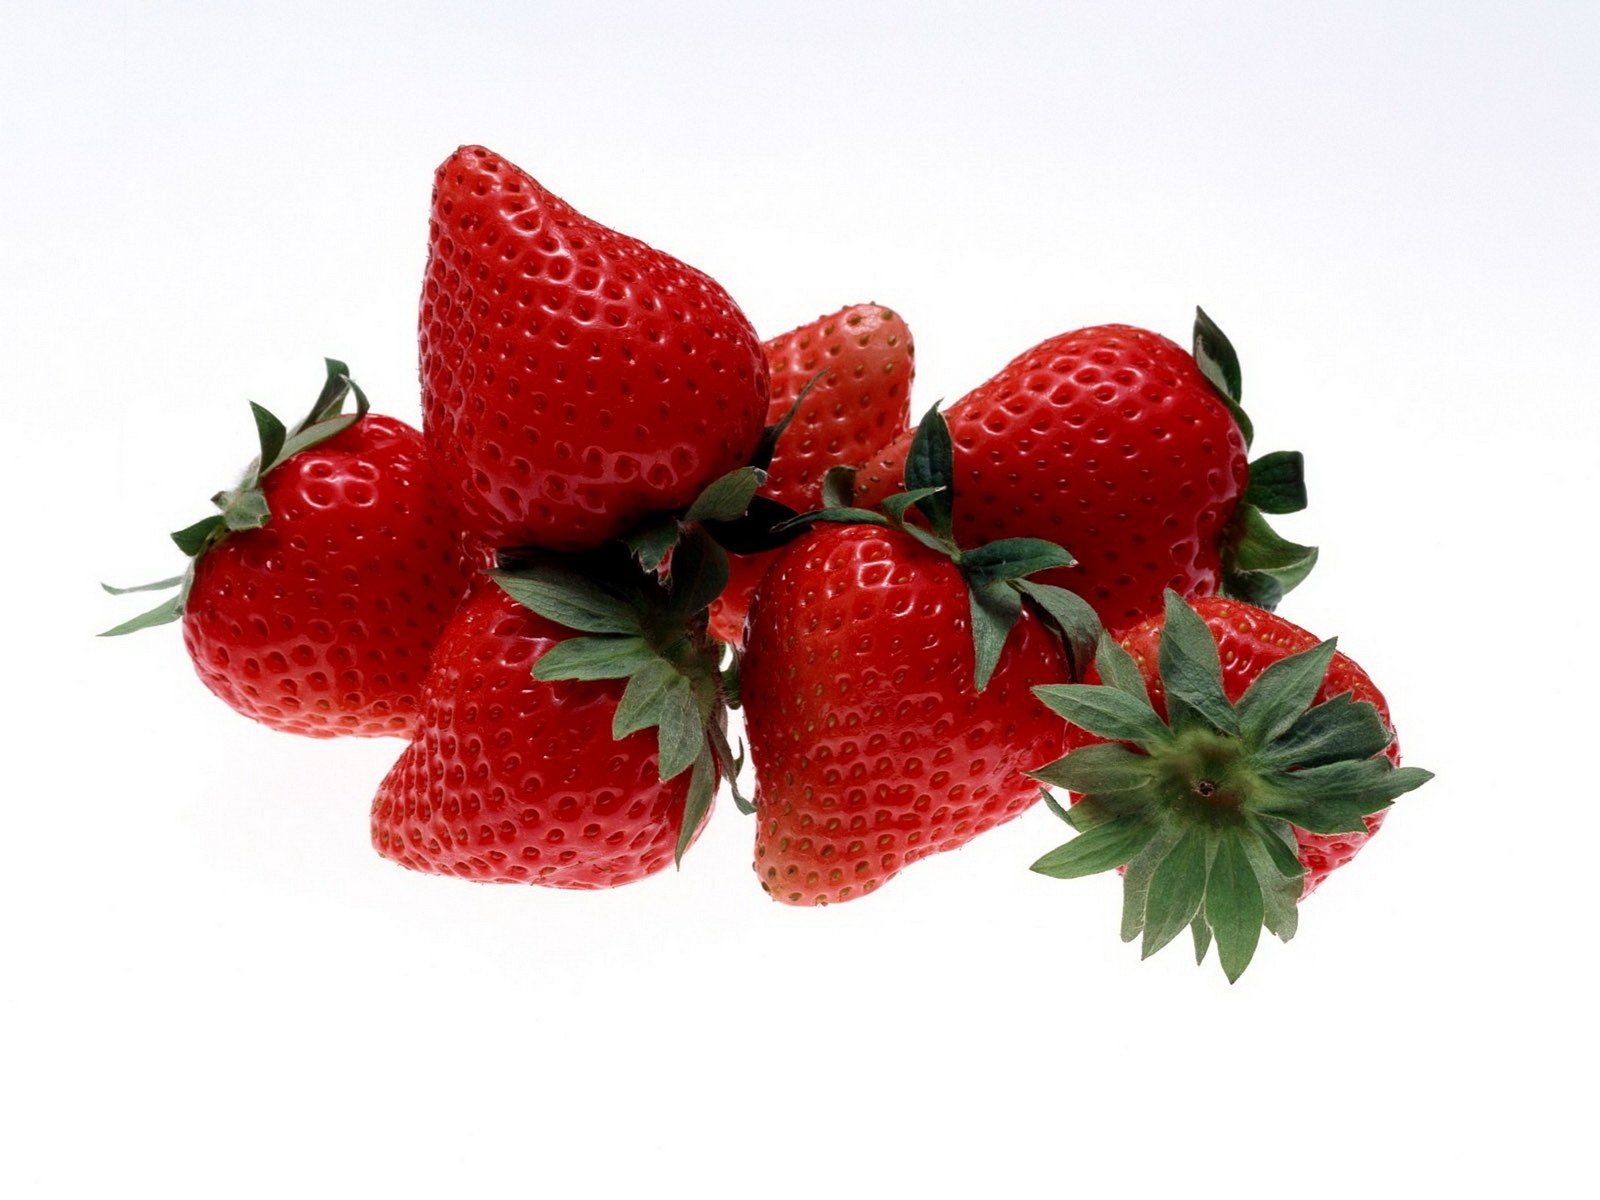 PC Wallpapers fruits, food, strawberry, berries, white